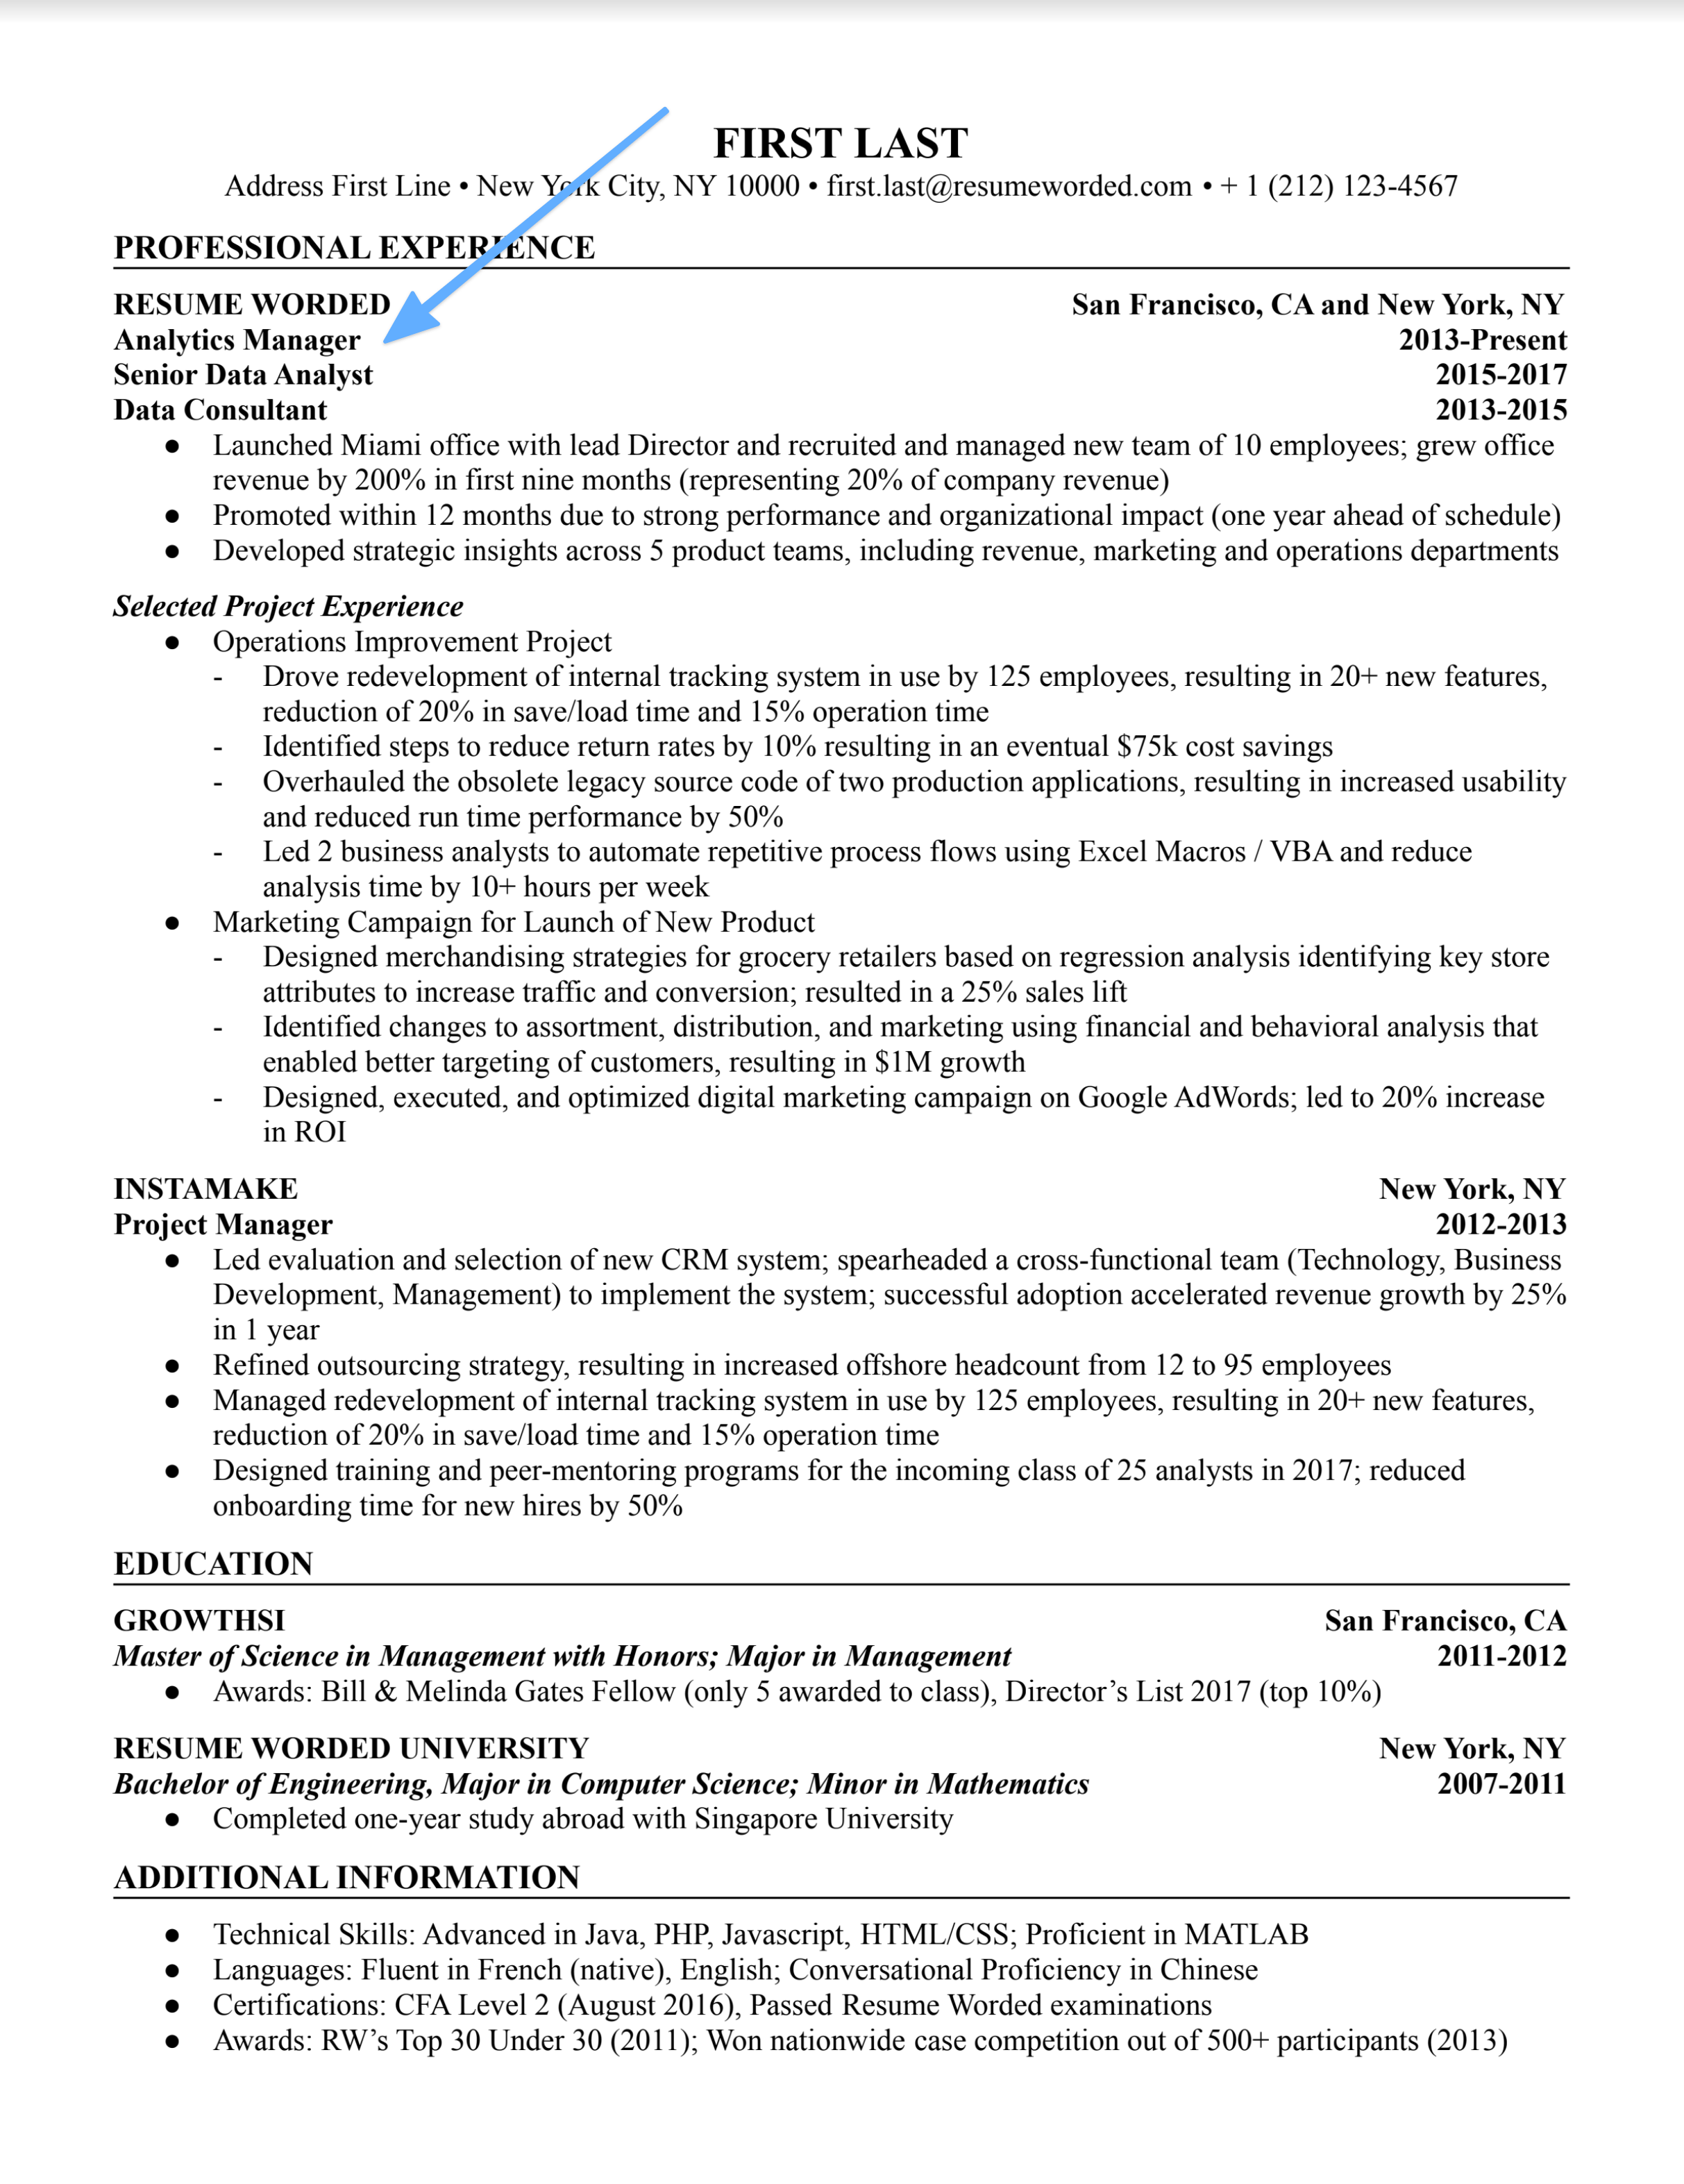 A CV showcasing technical proficiency and leadership experience for an Analytics Manager.